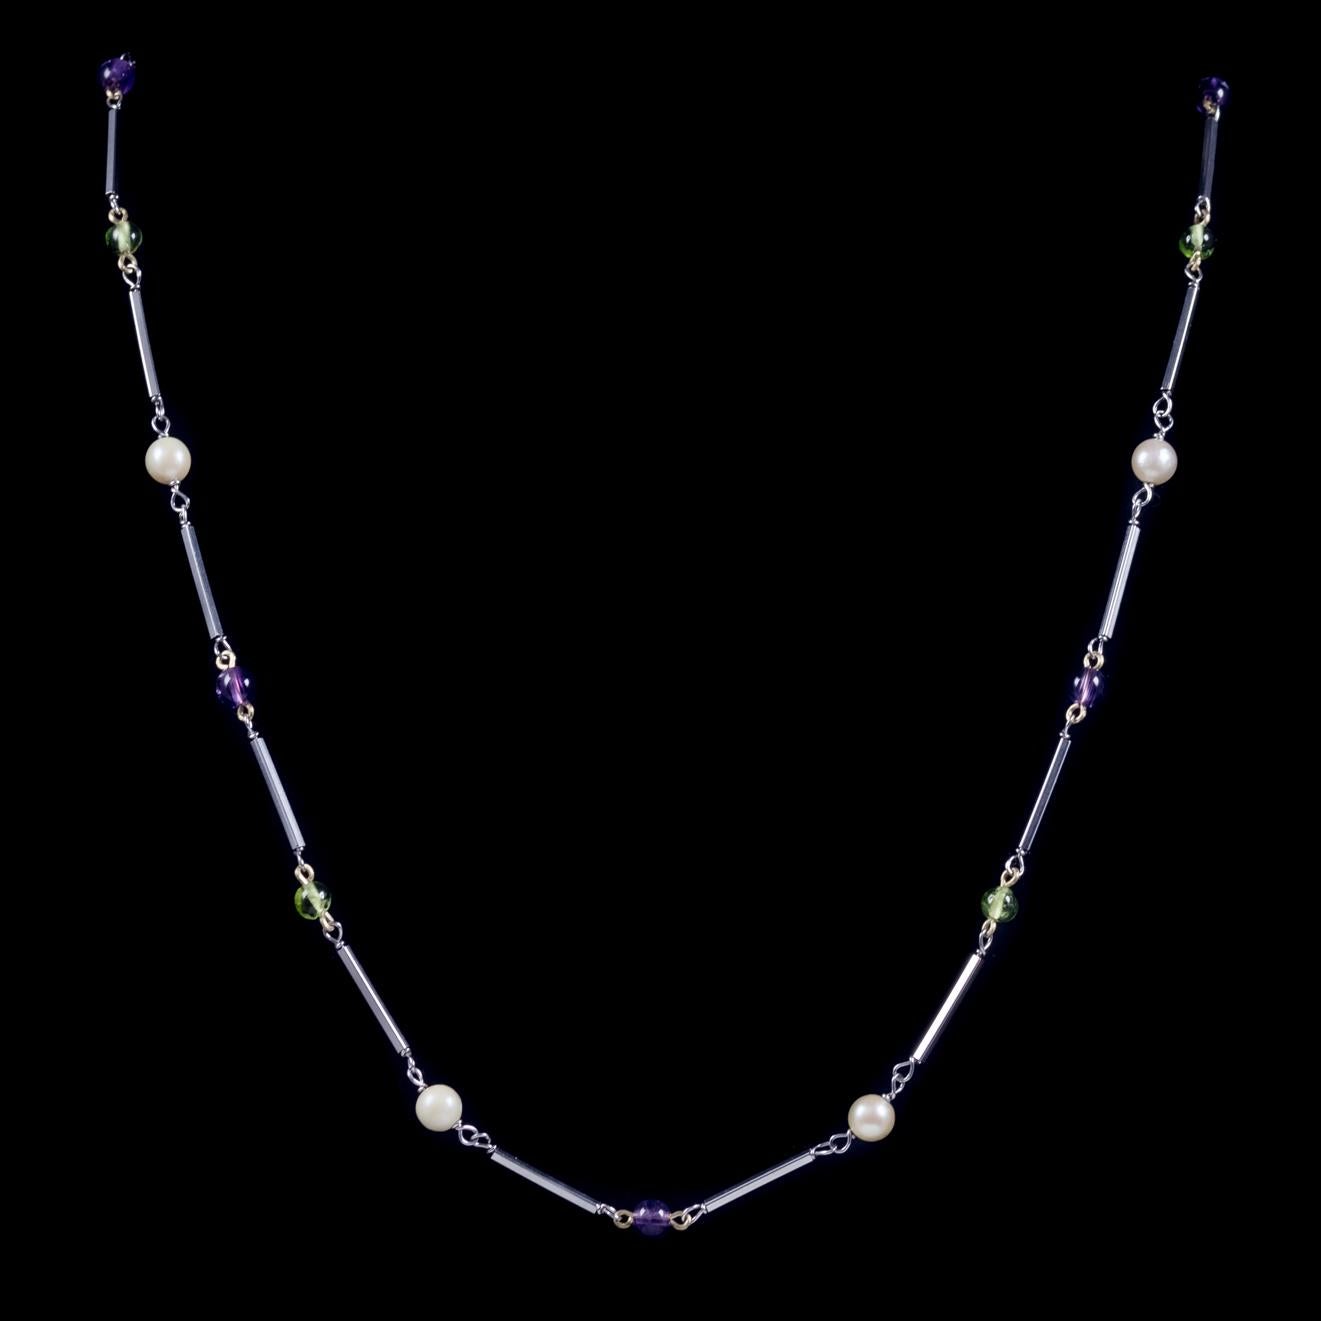 A beautiful antique Victorian Suffragette necklace C. 1900, adorned with green Peridot and violet Amethyst beads as well as creamy white Pearls. 

Suffragettes liked to be depicted as feminine, their jewellery popularly consisted of Violet, Green